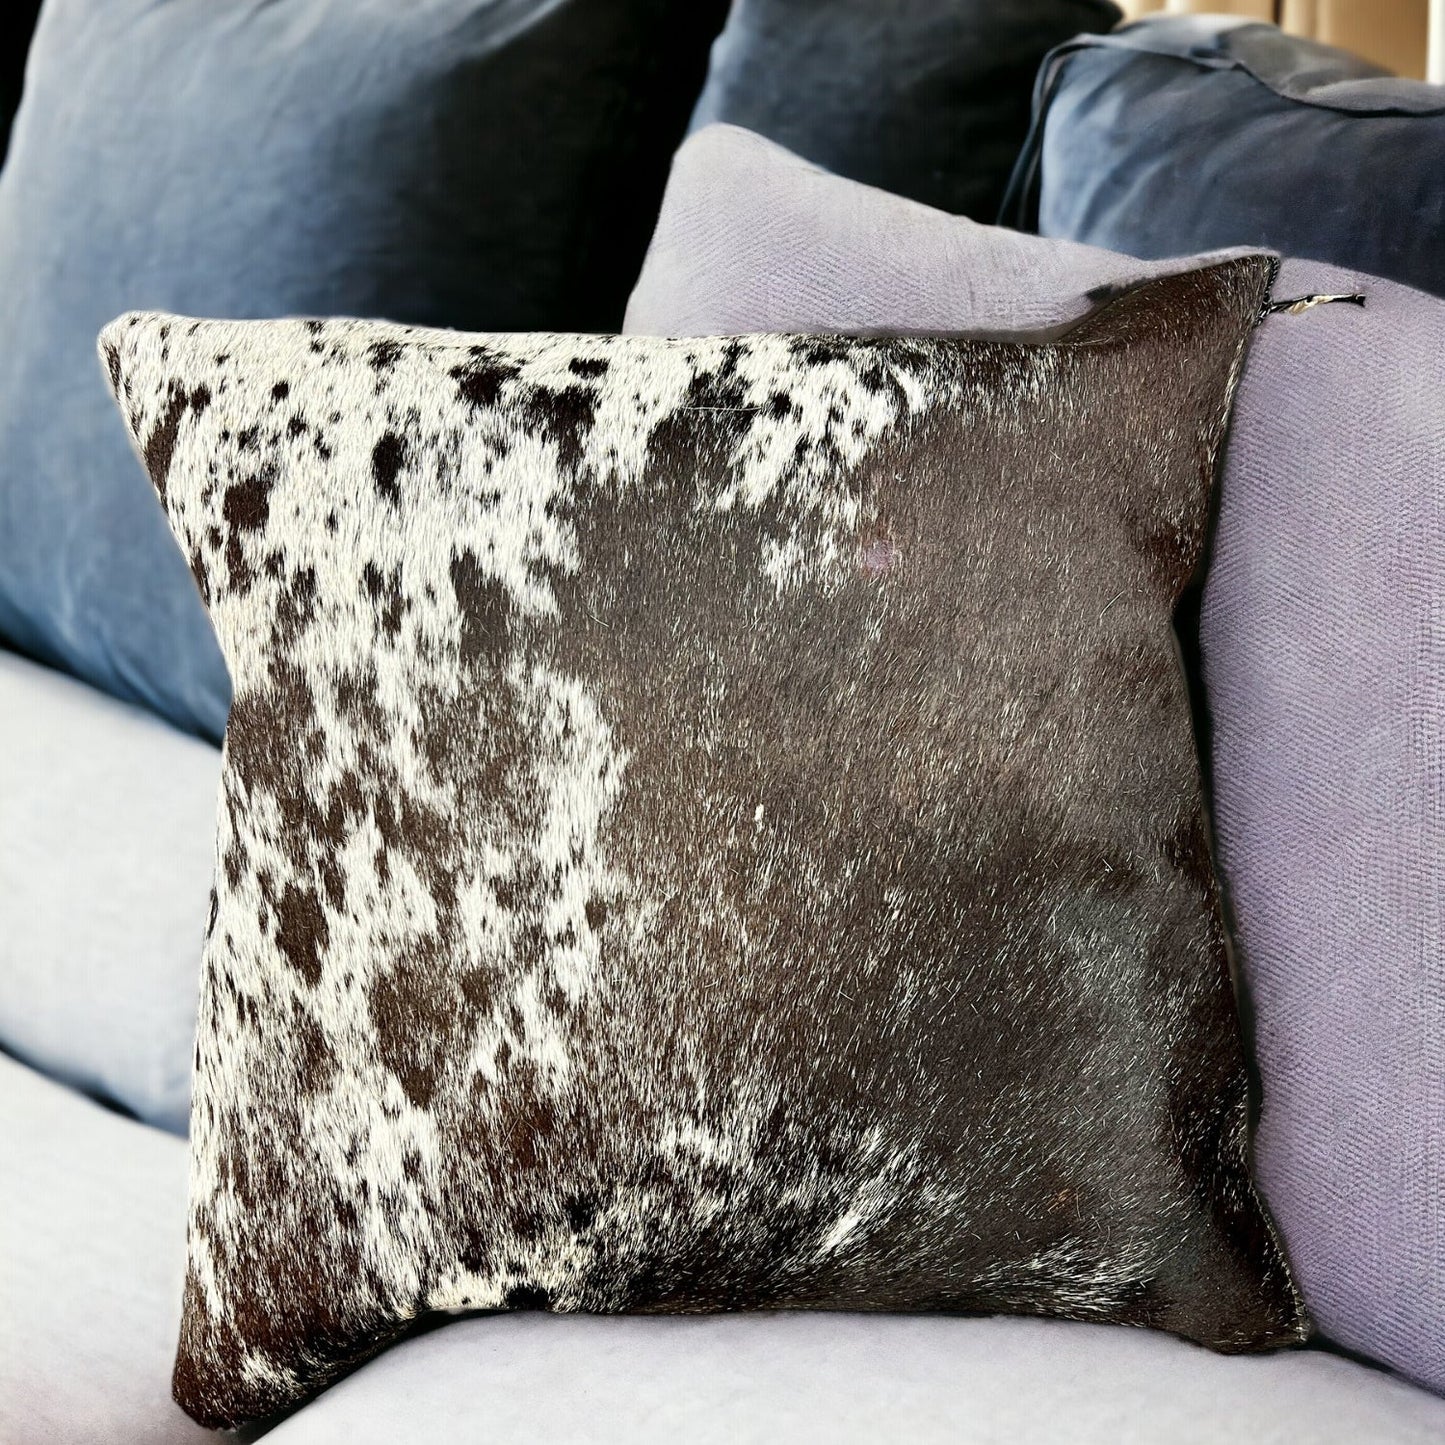 Salt and Pepper Cowhide Pillow - Rodeo Cowhide Rugs12x22 in